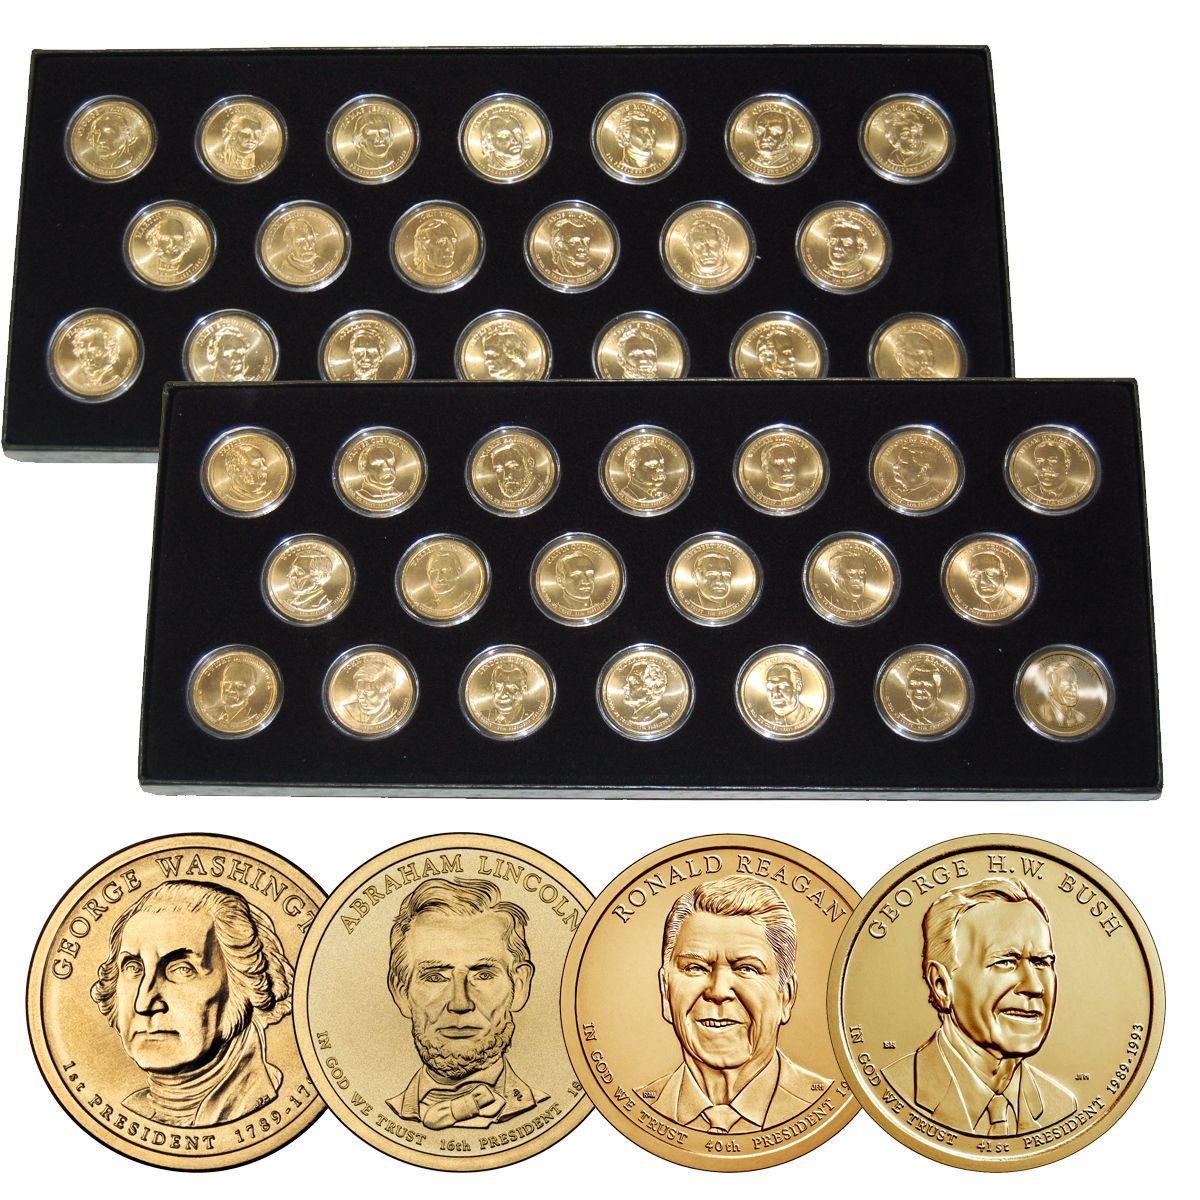 A 2011 Presidential Dollar COMPLETE 4 Coin Set "Brilliant Uncirculated" COINS 